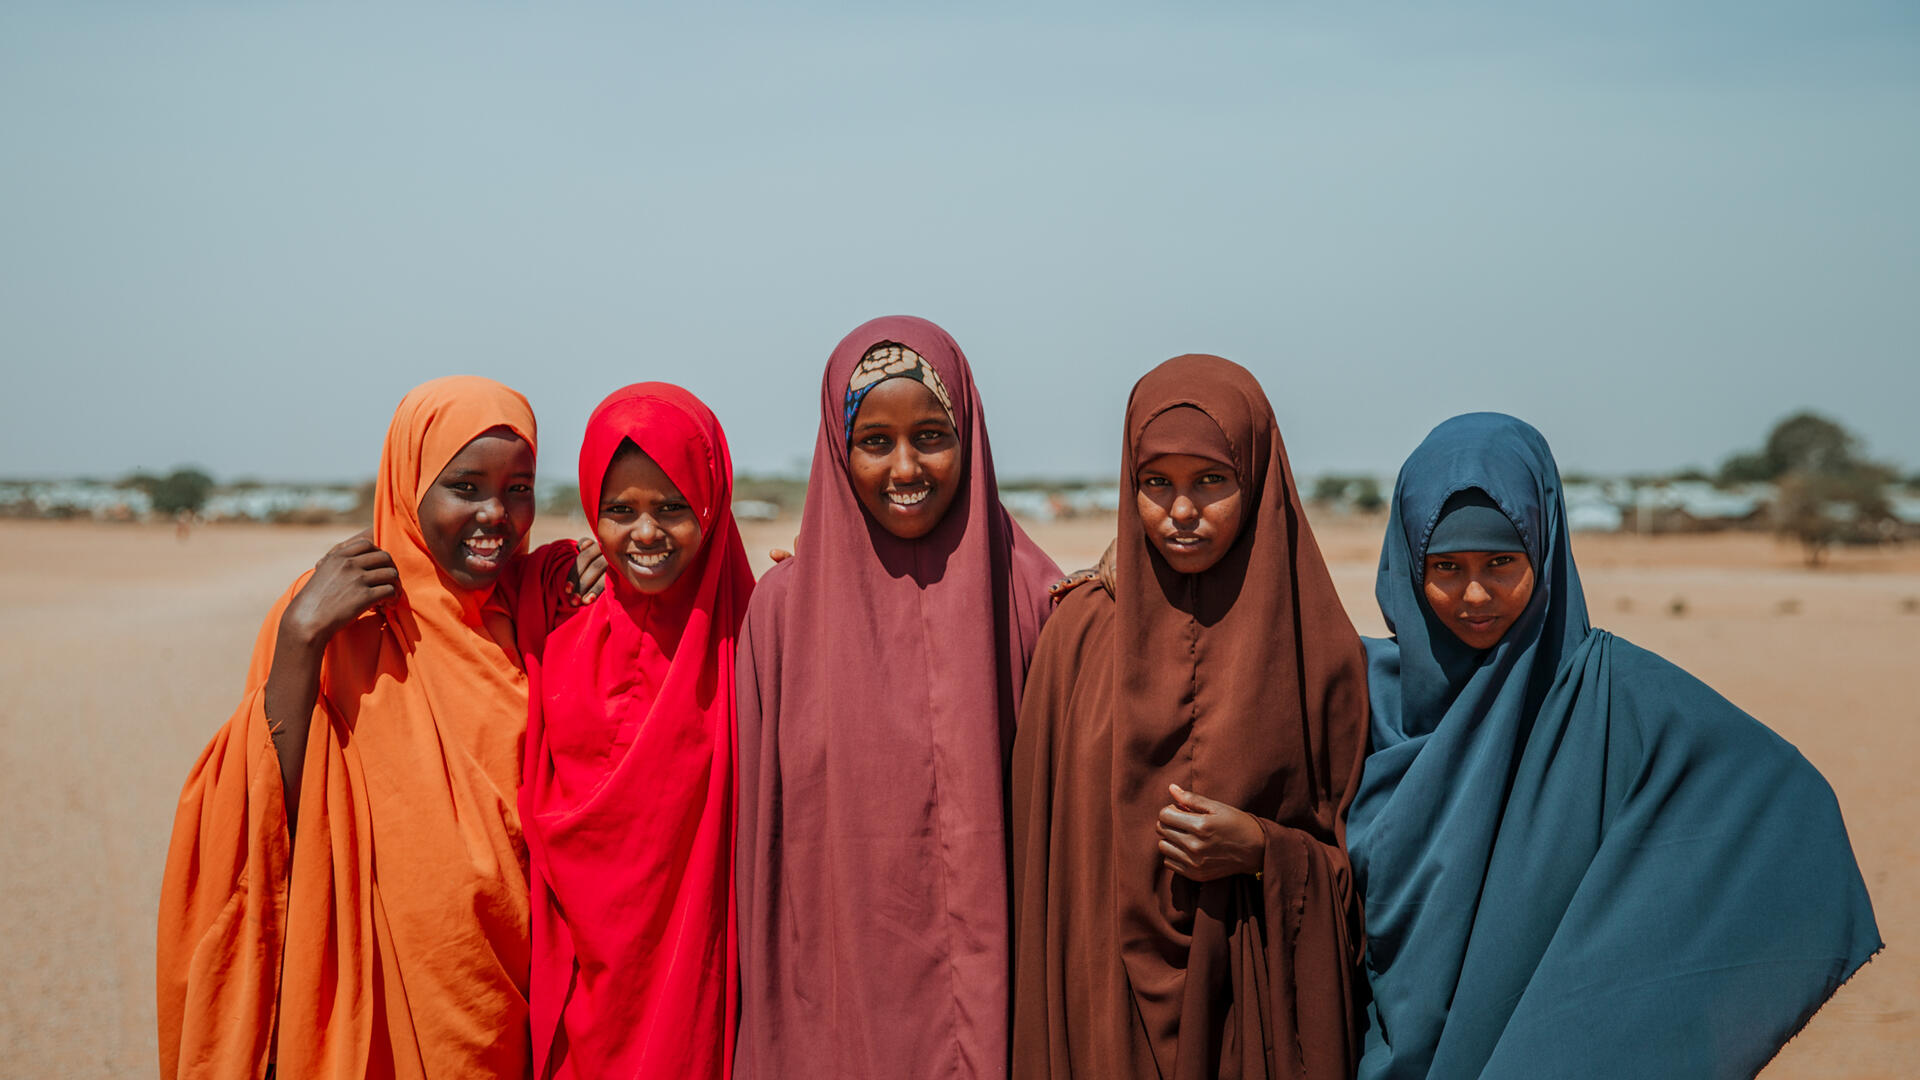 Five girls who are part of the IRC's Girl Shine program -- Ampia, Asha, Hibo, Shamsa, and Nurta --stand together for a photo in a dry landscape in Ethiopia.